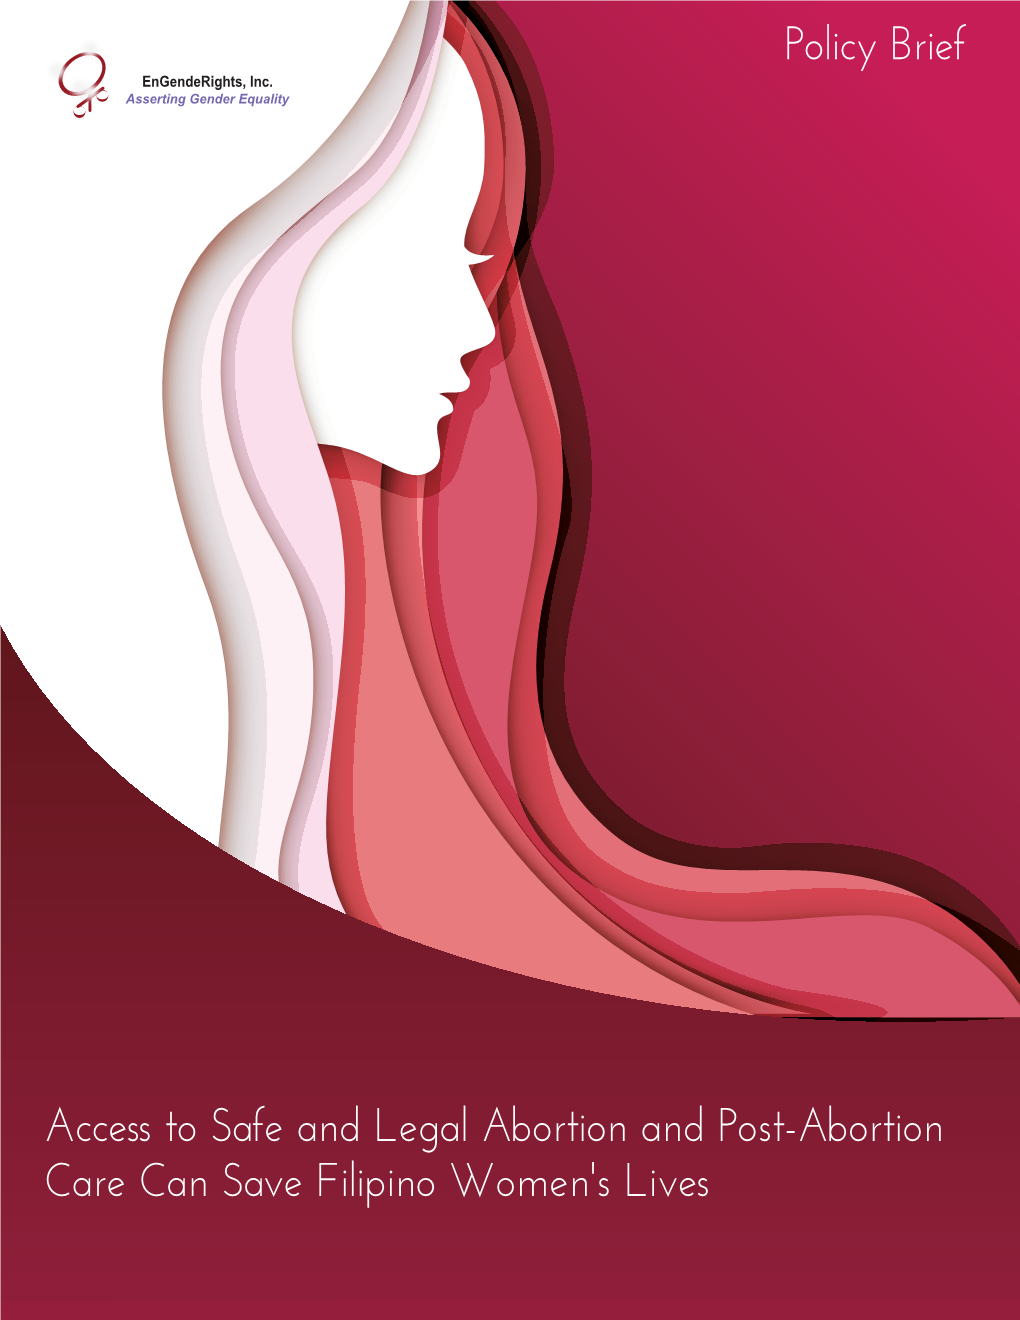 Access to Safe and Legal Abortion and Post-Abortion Care Can Save Filipino Women's Lives